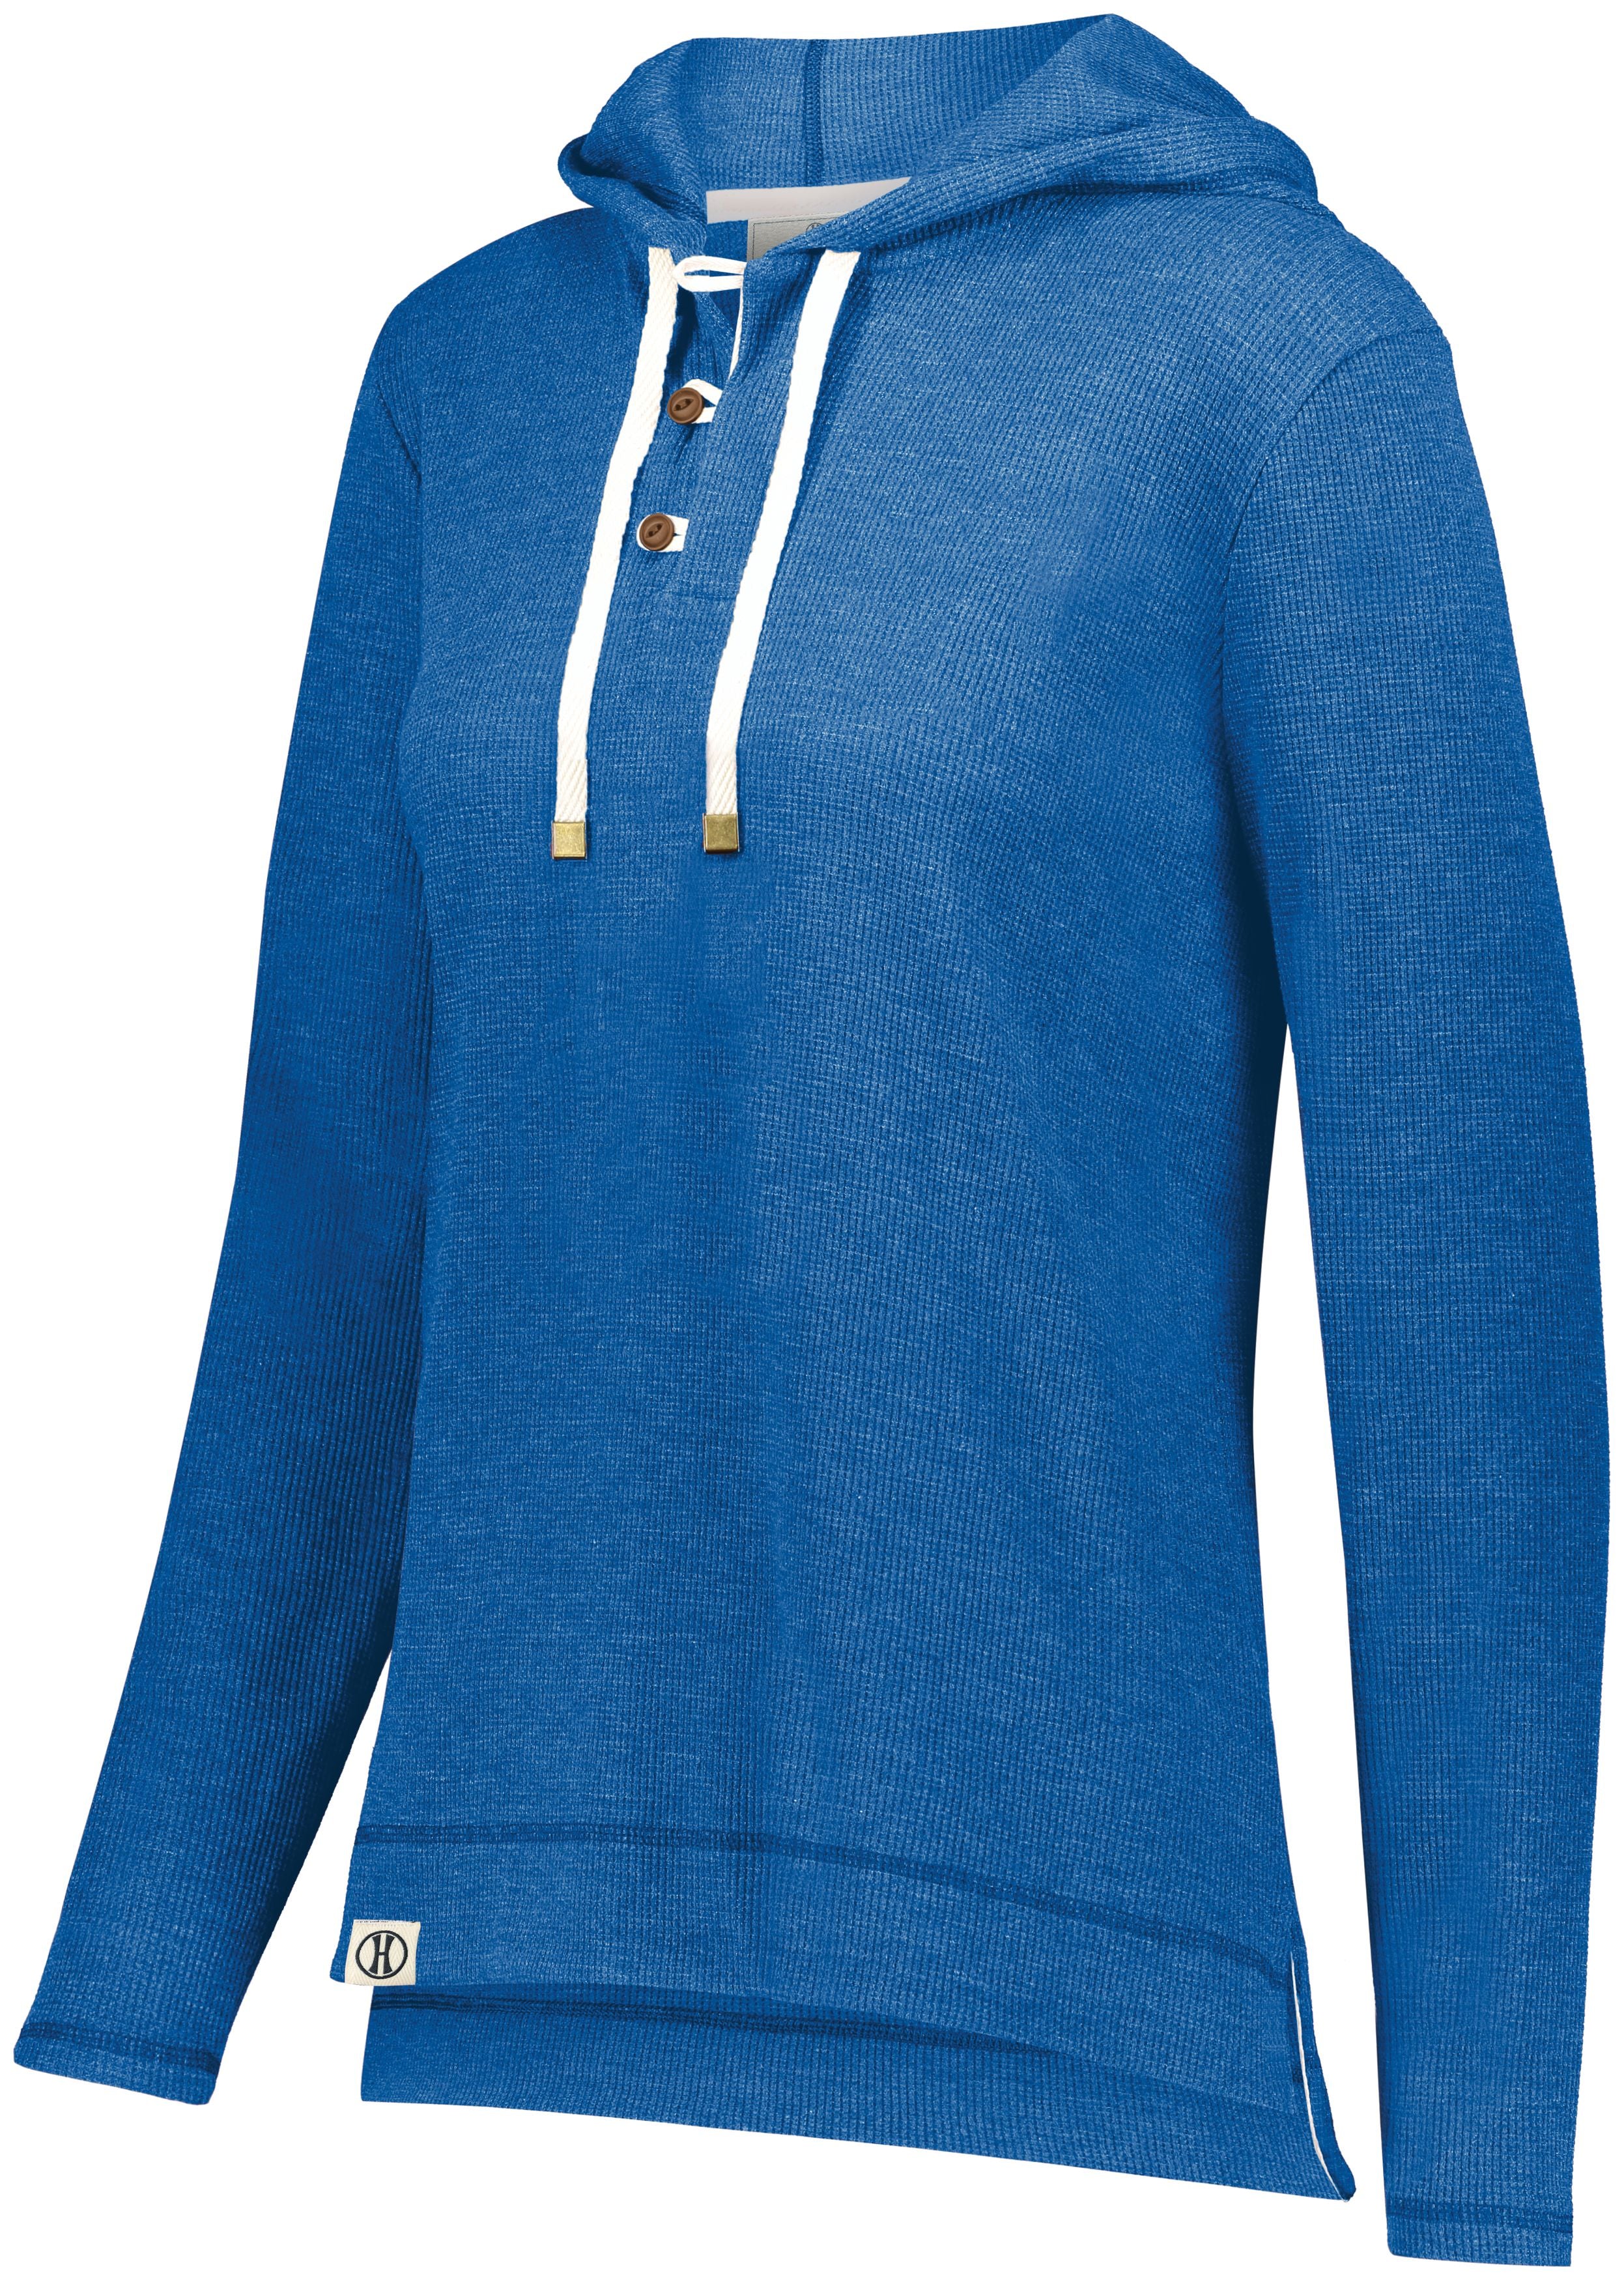 Holloway Ladies Coast Hoodie in Royal Heather  -Part of the Ladies, Holloway, Shirts product lines at KanaleyCreations.com